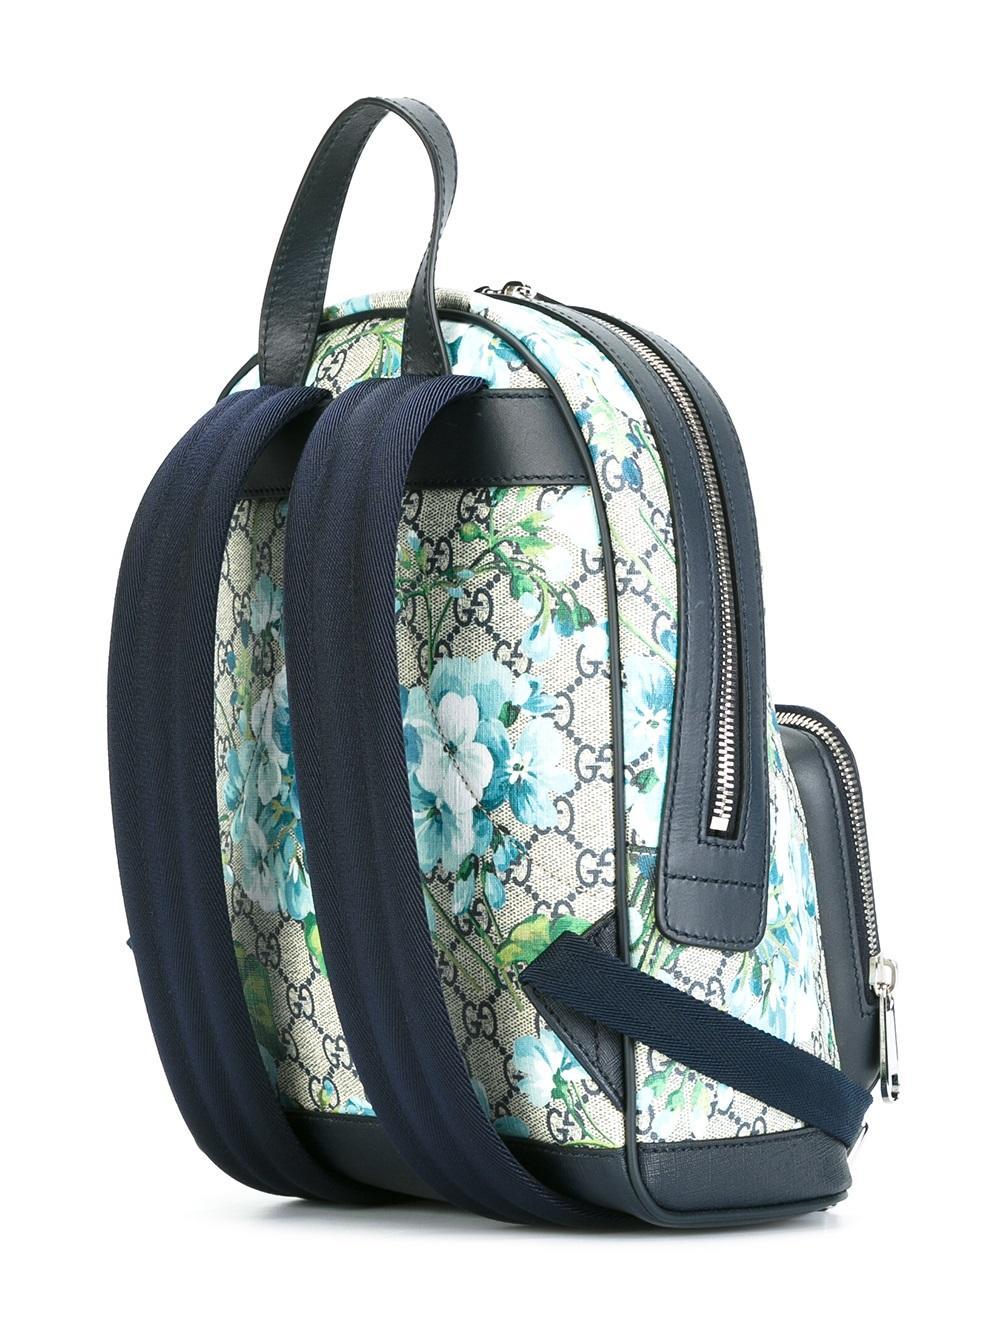 Gucci Canvas Gg Blooms Supreme Small Backpack in Tan / Blue (Blue) - Lyst